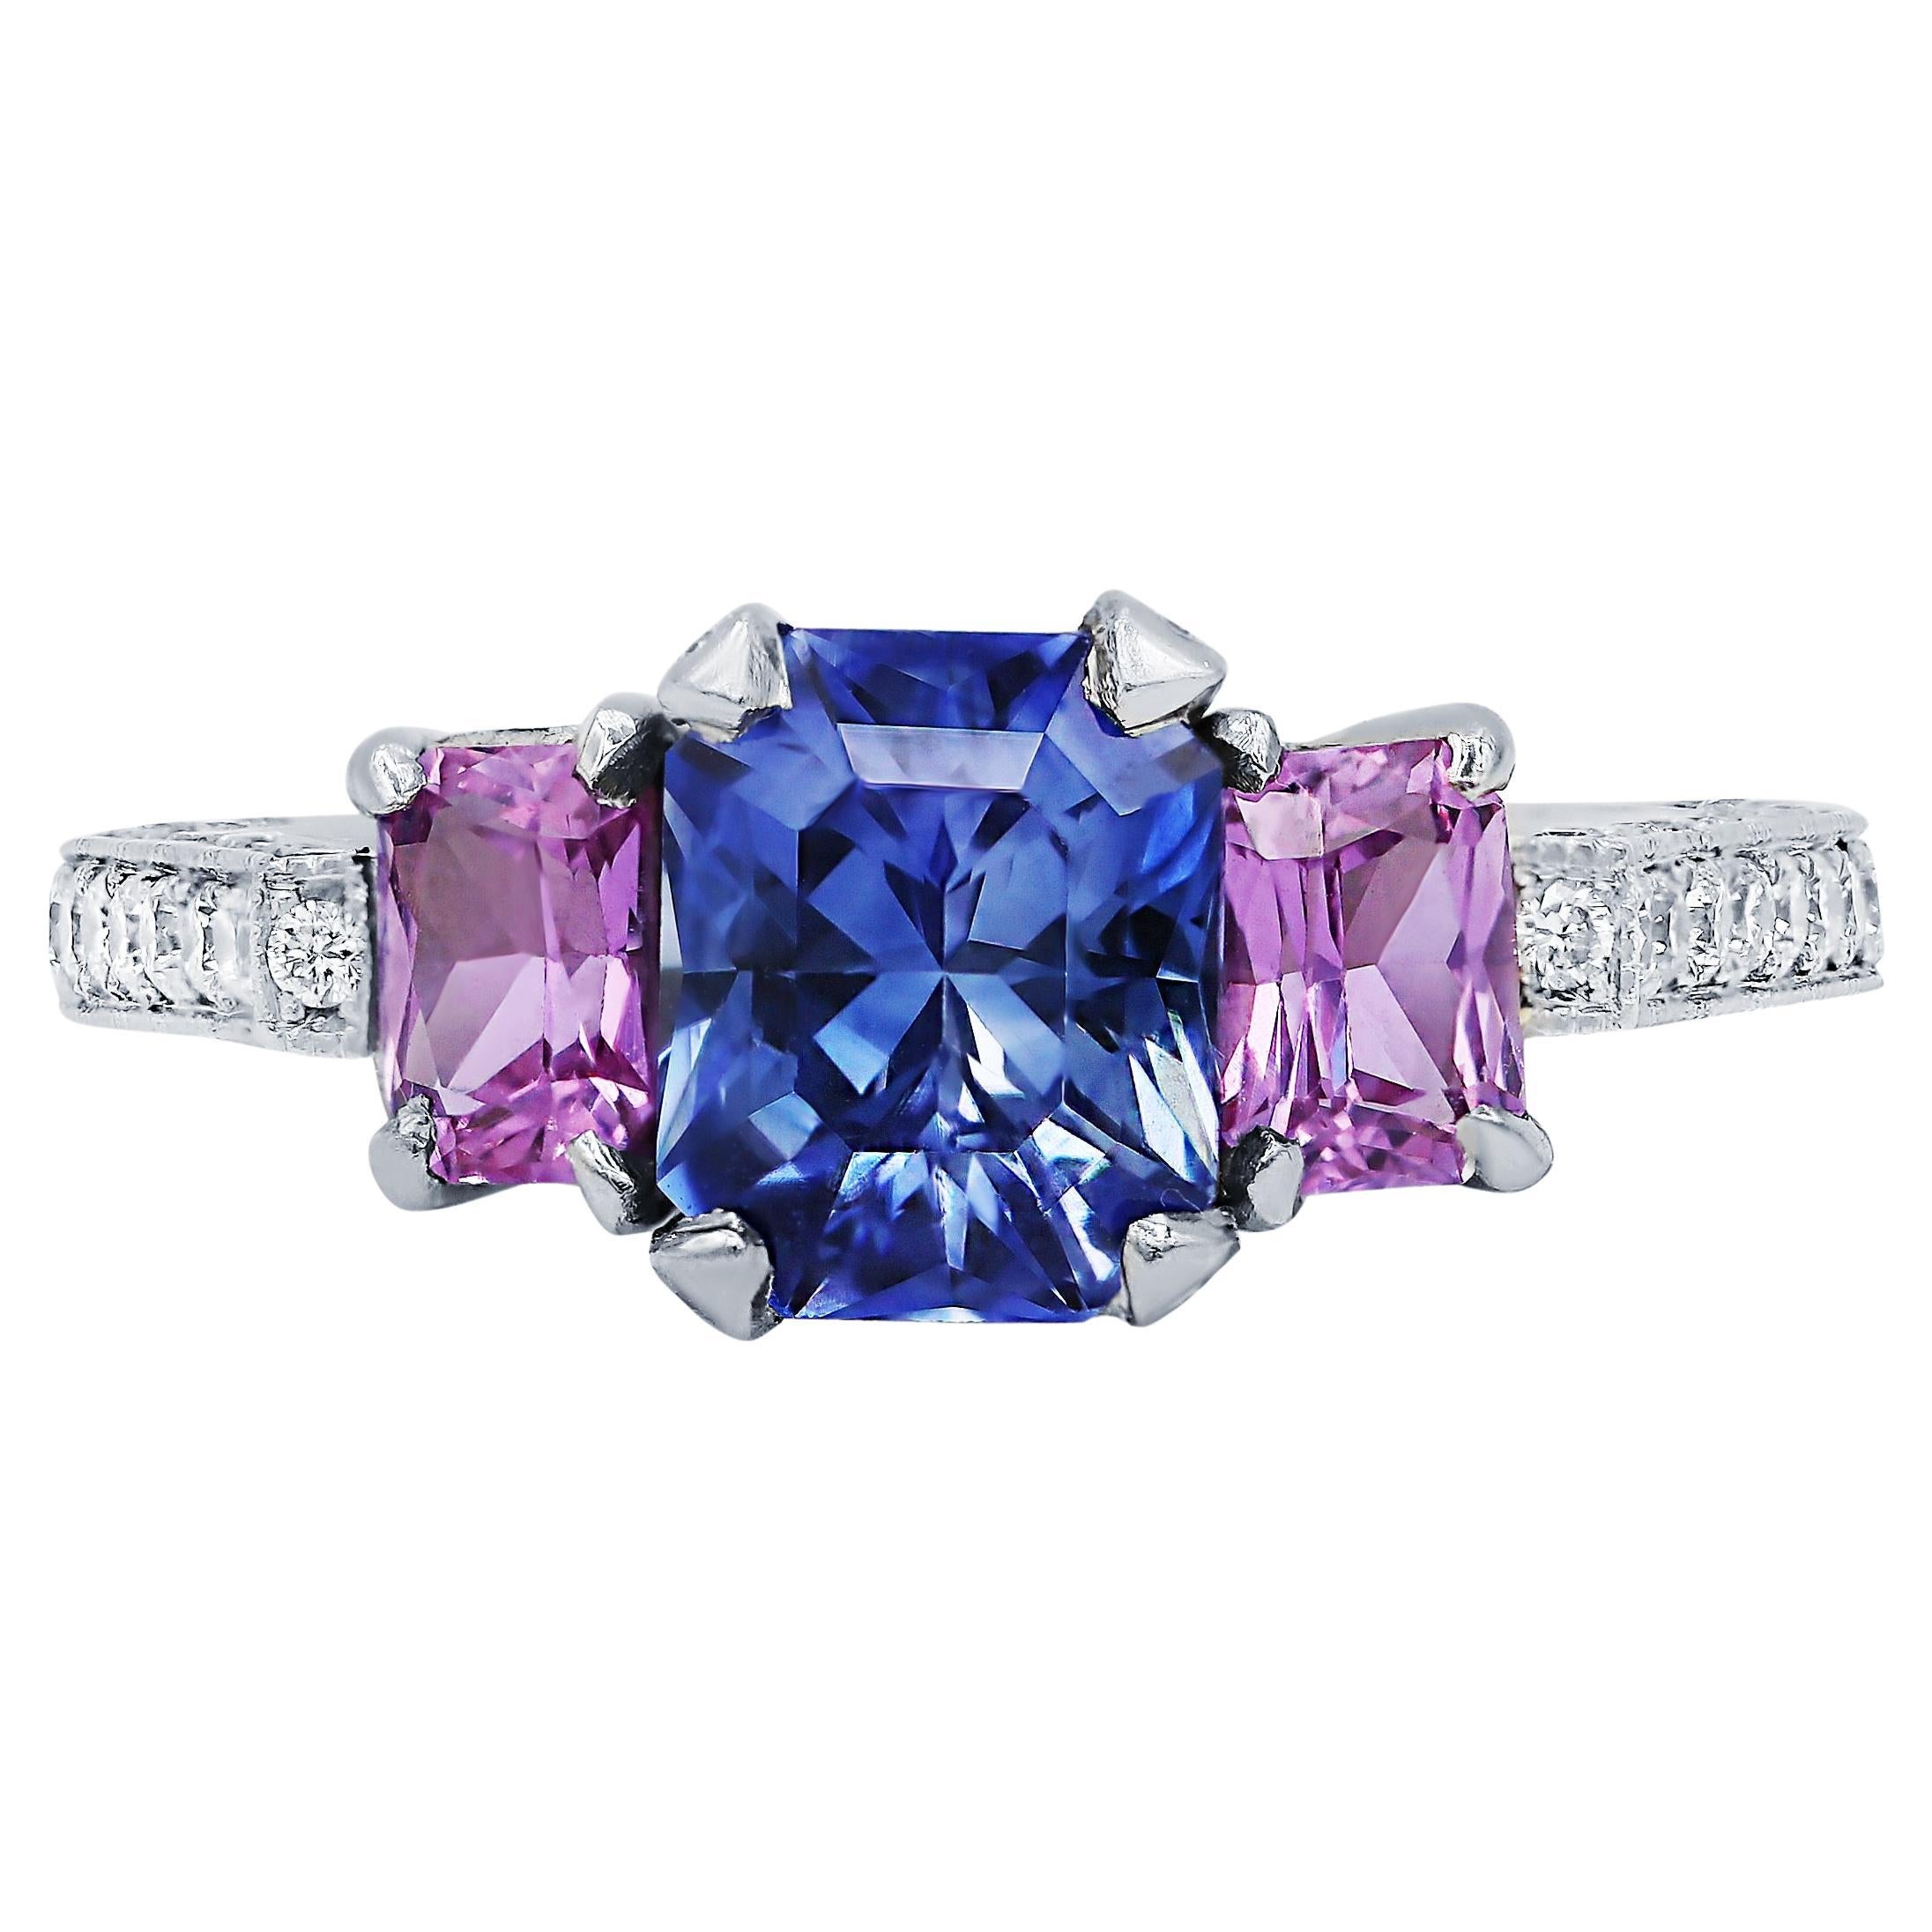 Diana M. Platinum sapphire and diamond ring featuring a center 1.84 ct  For Sale